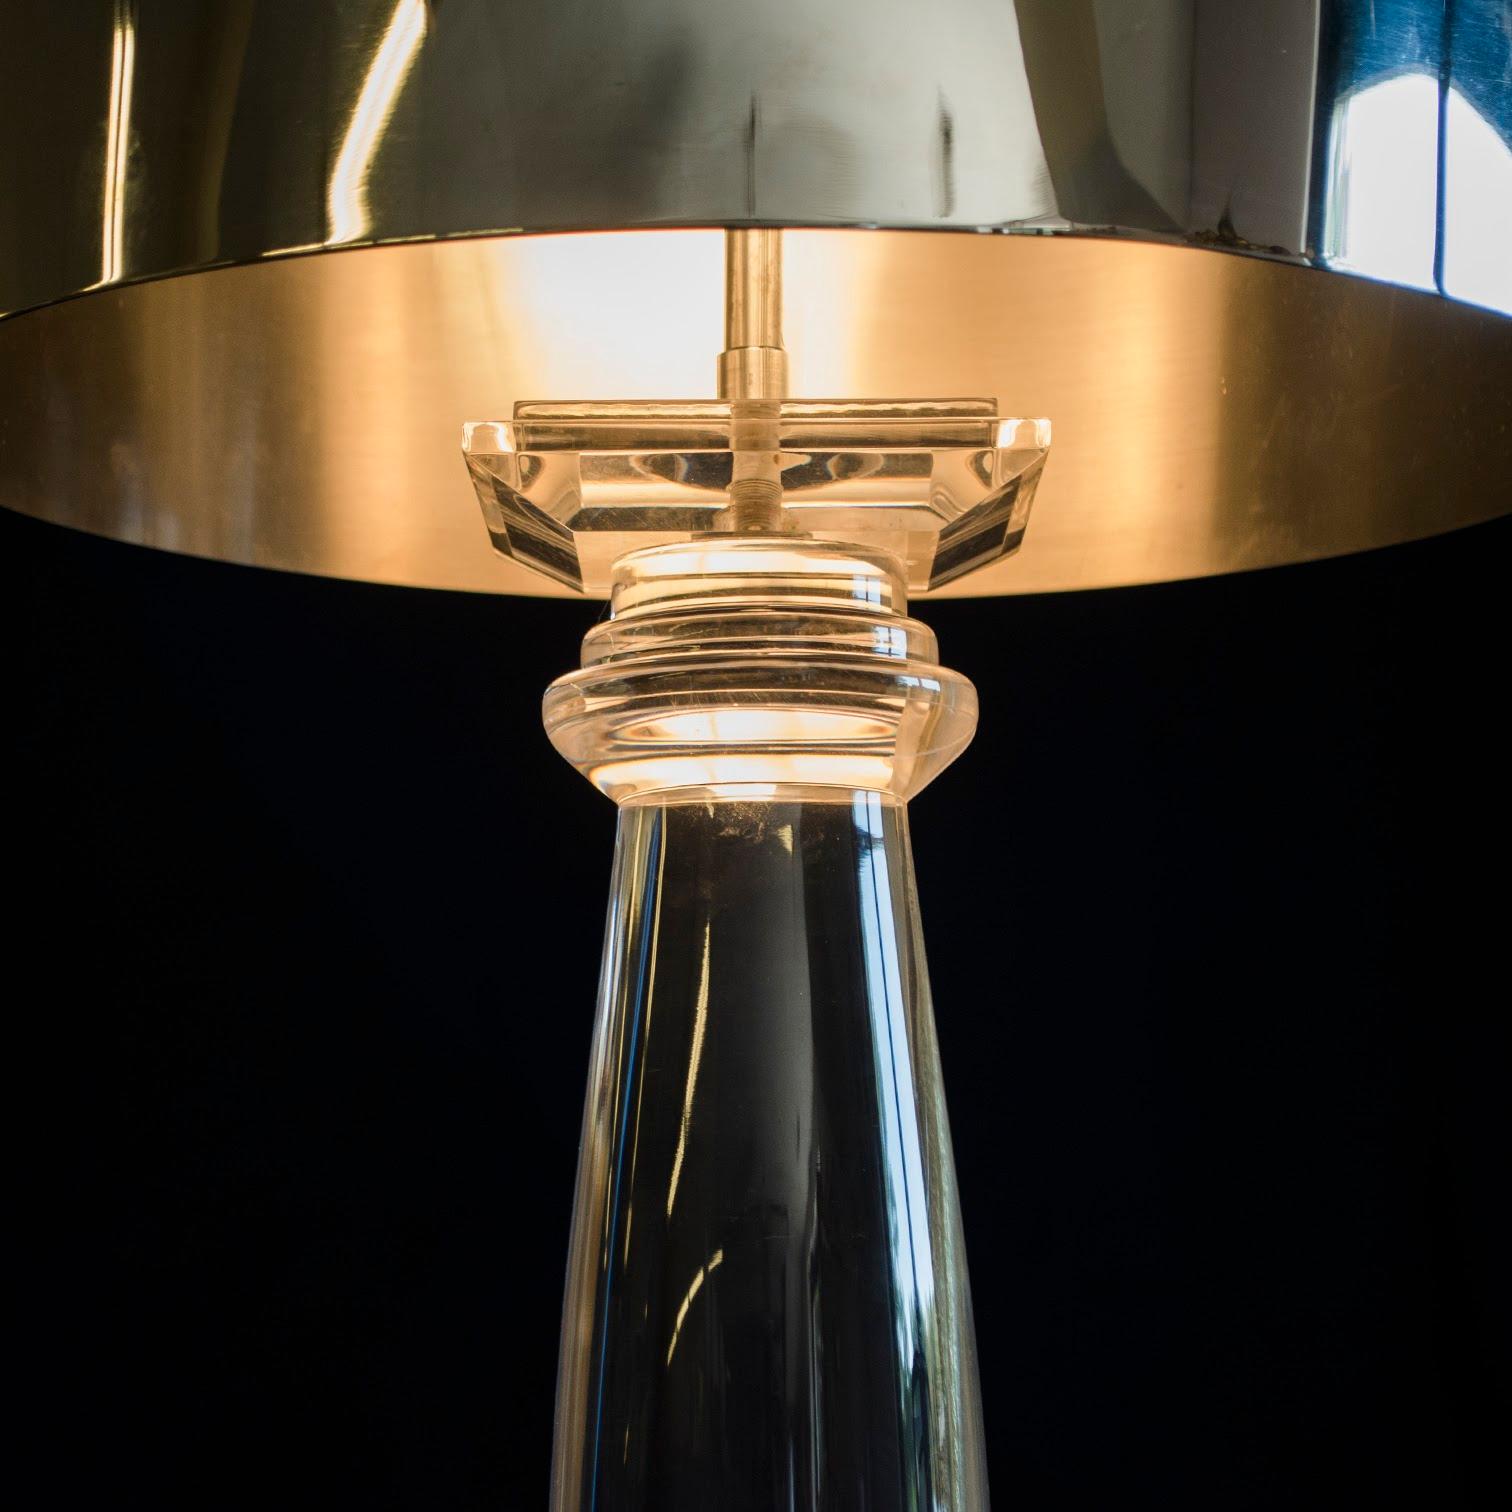 Iconic Karl Springer lamps featuring translucent lucite columns that rise out of stepped-square bases. The round removable shades are a space-age reminiscent reflective polished chrome measuring 14 inches in diameter and 12 inches tall and are